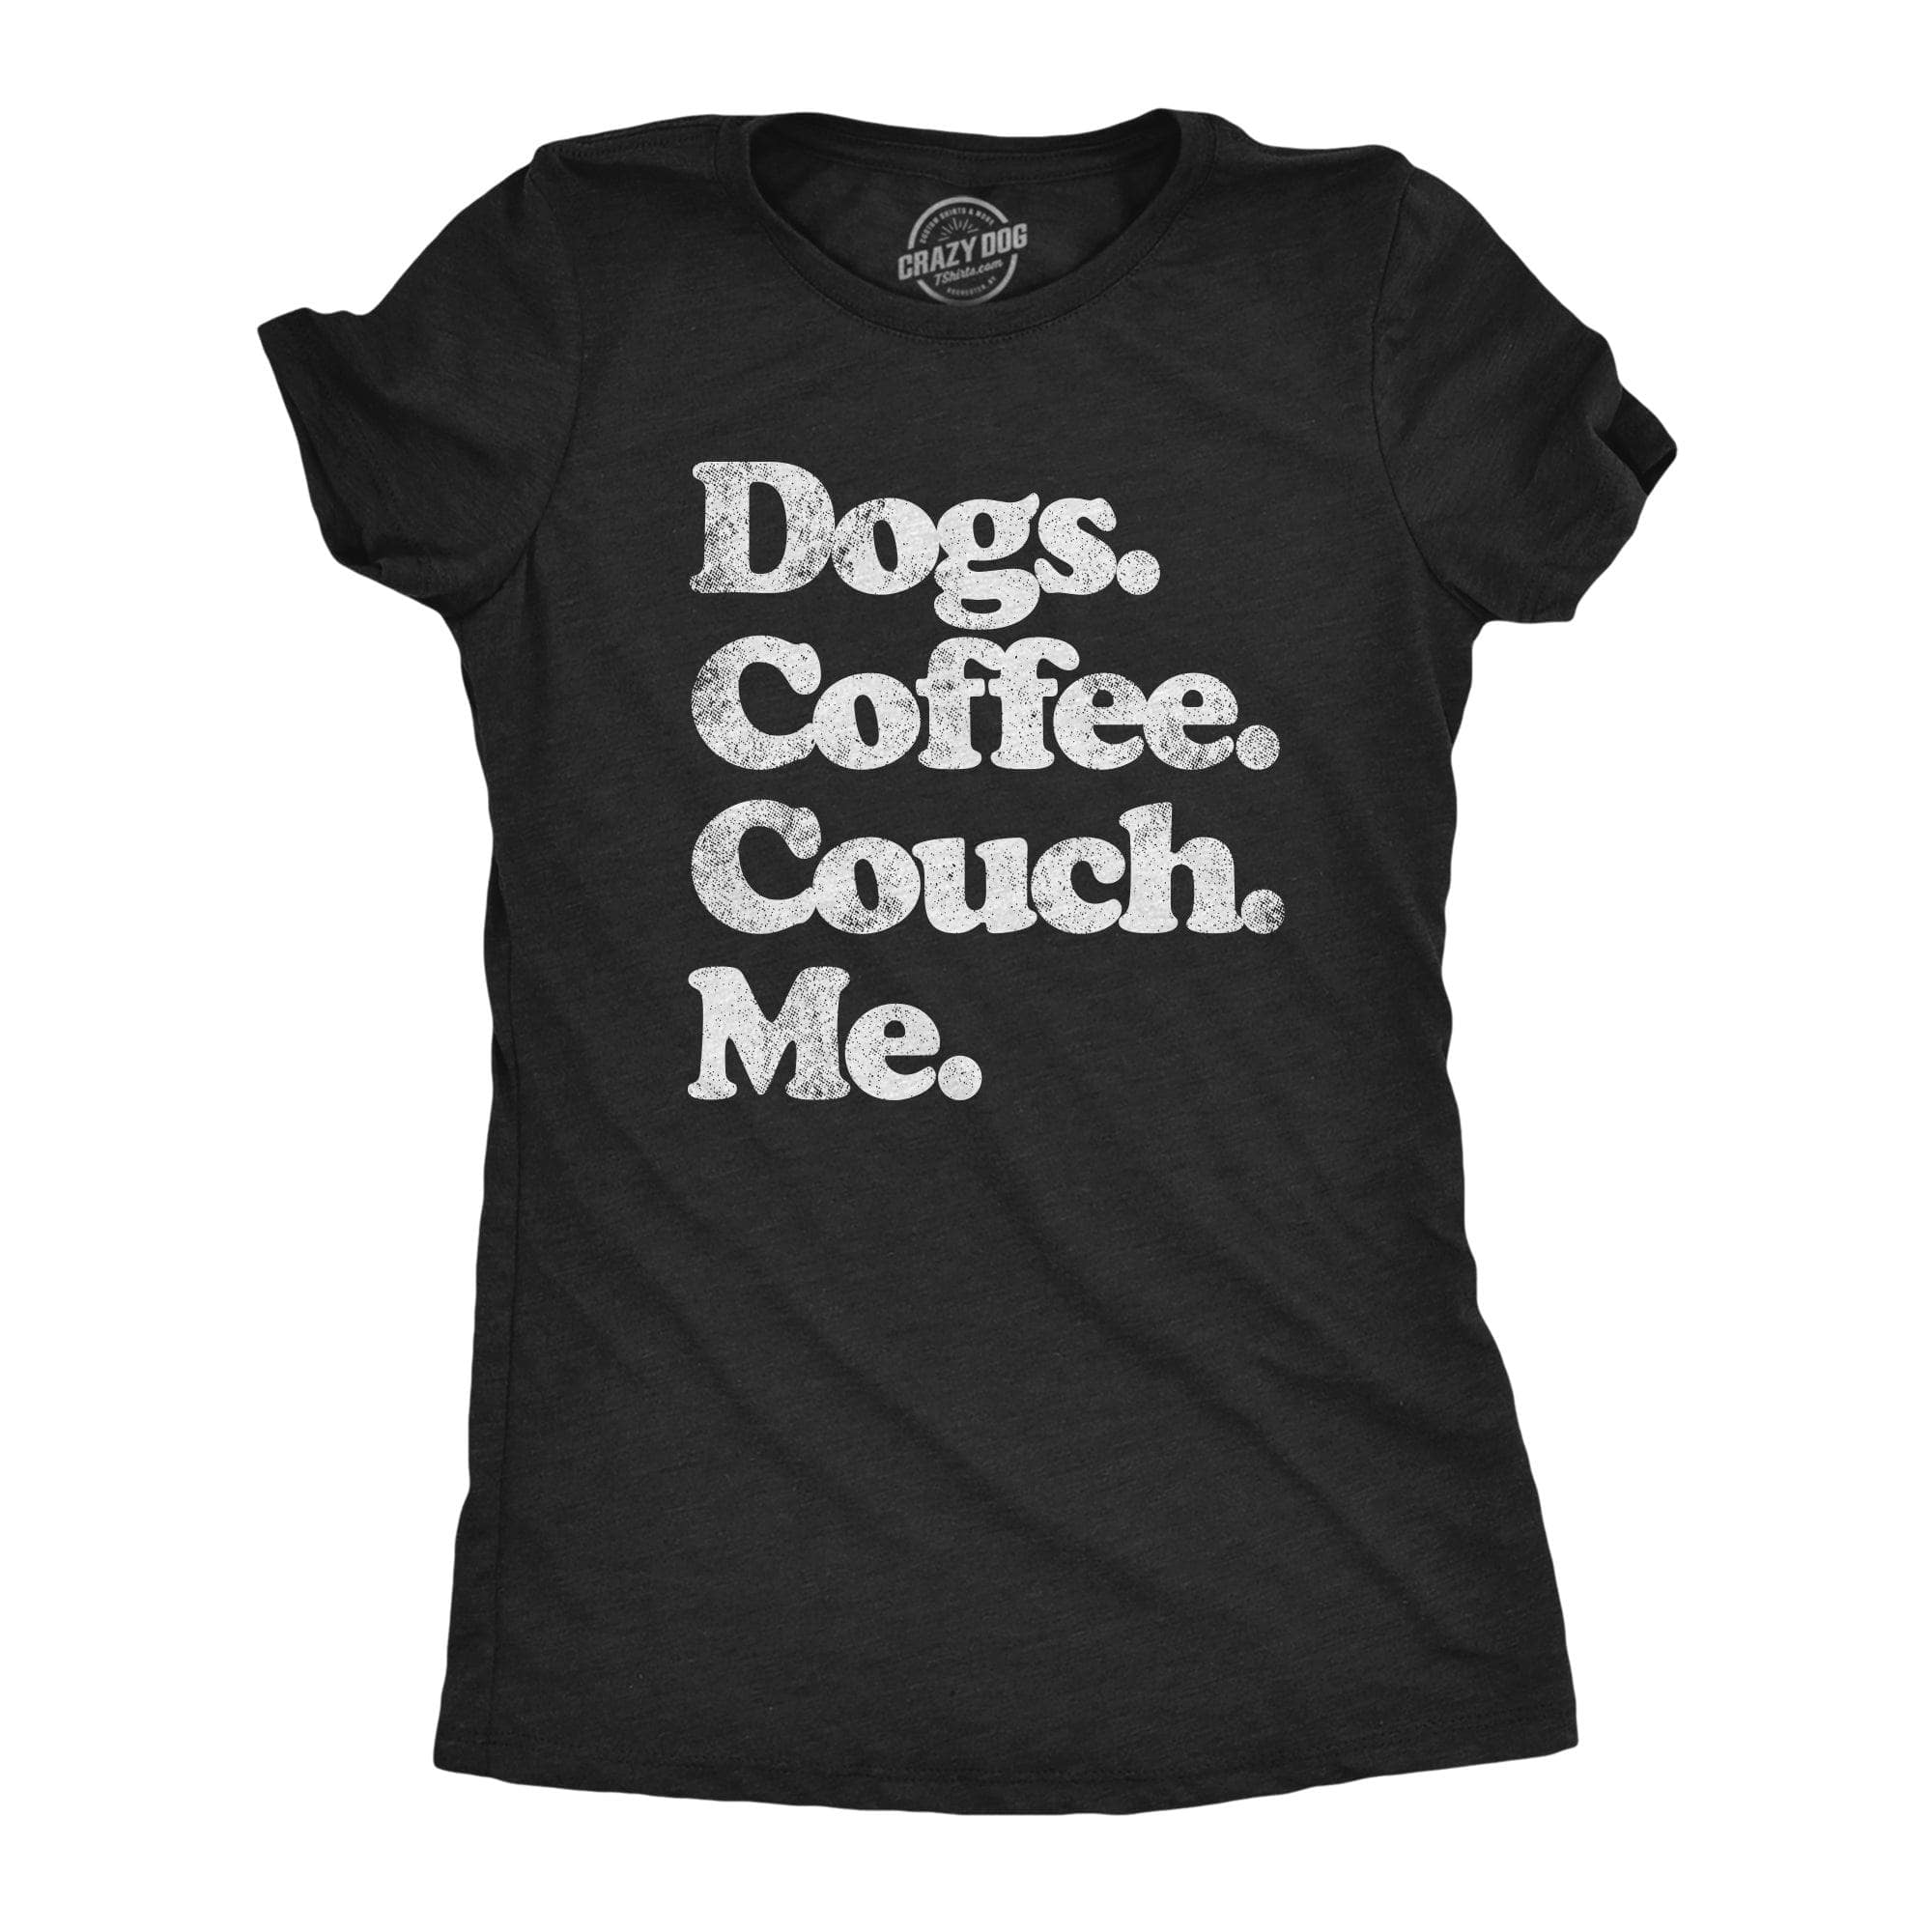 Dogs Coffee Couch Me Women's Tshirt  -  Crazy Dog T-Shirts